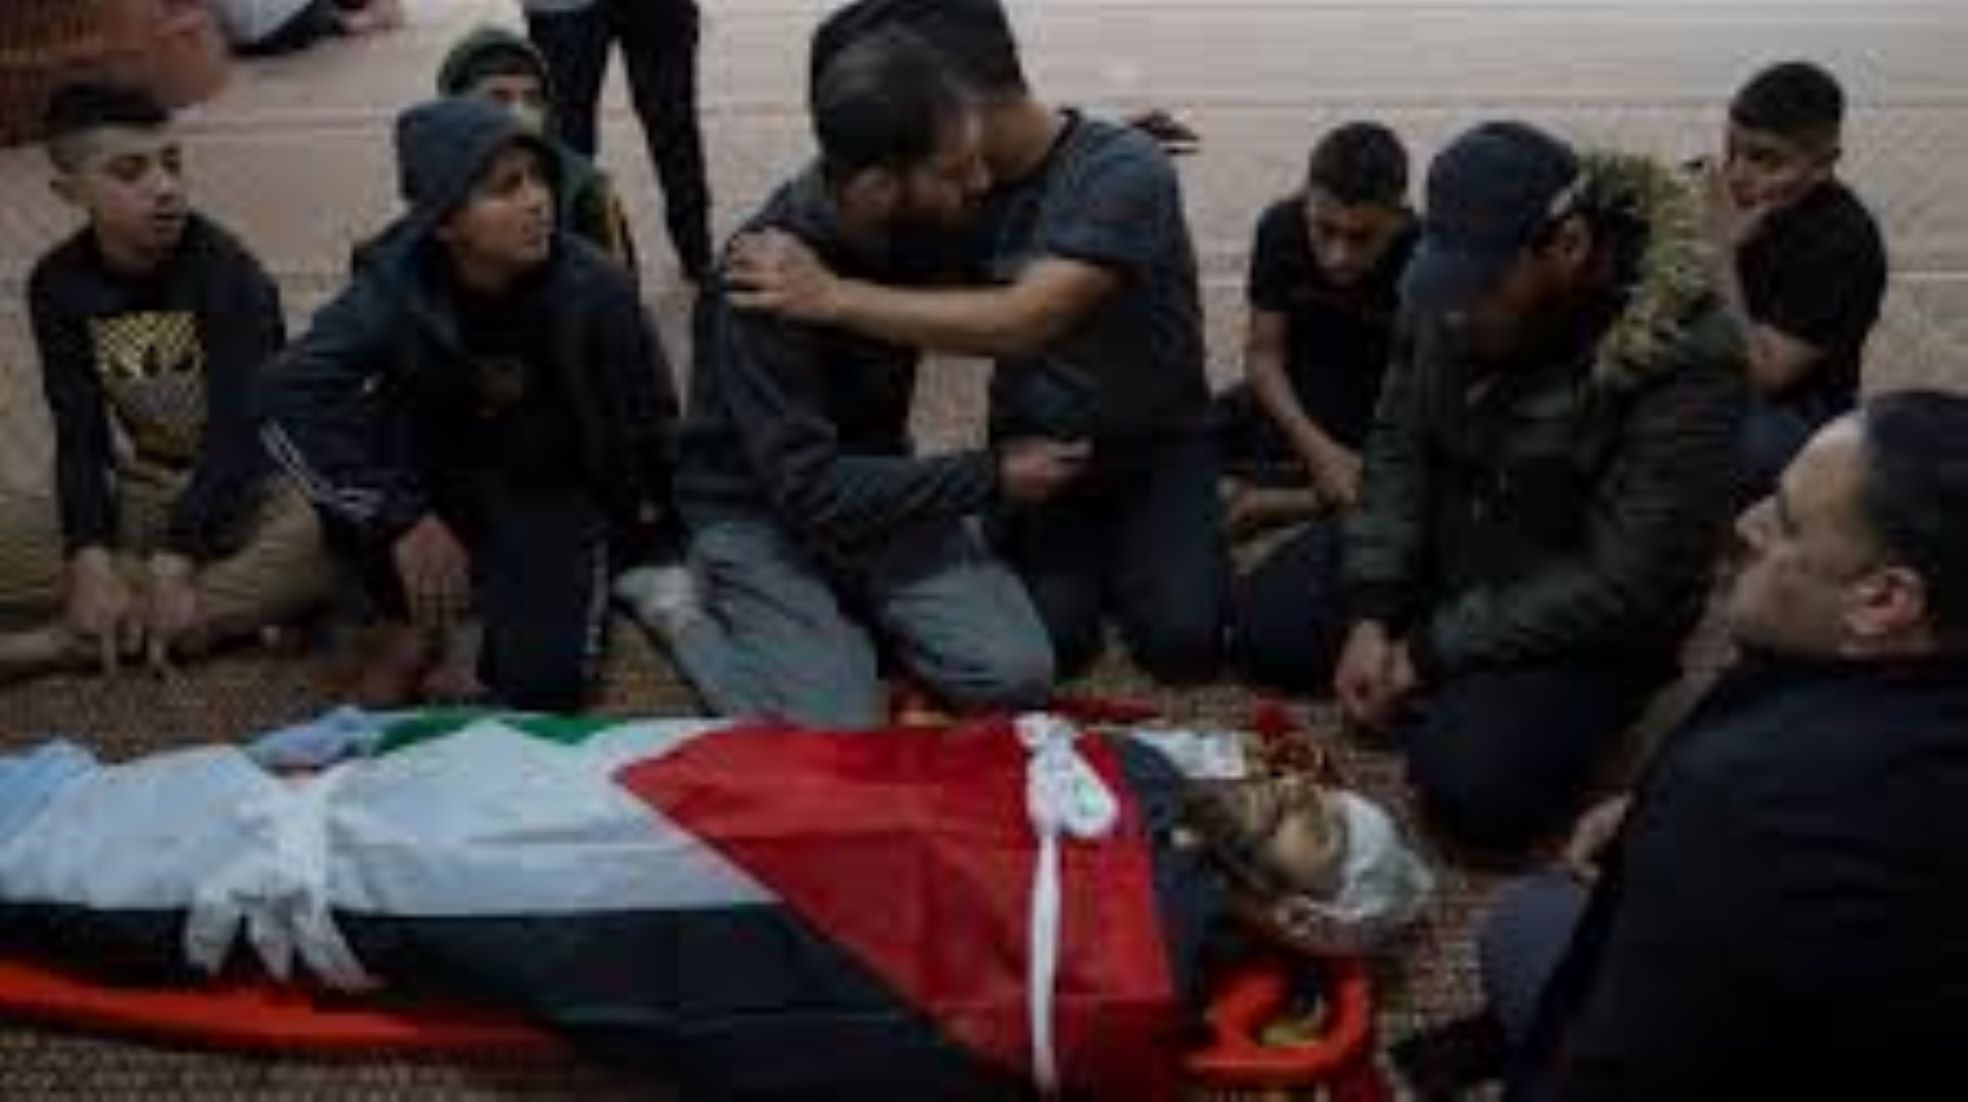 Two Palestinians Killed By Israeli Settlers In West Bank: Palestinian Health Ministry